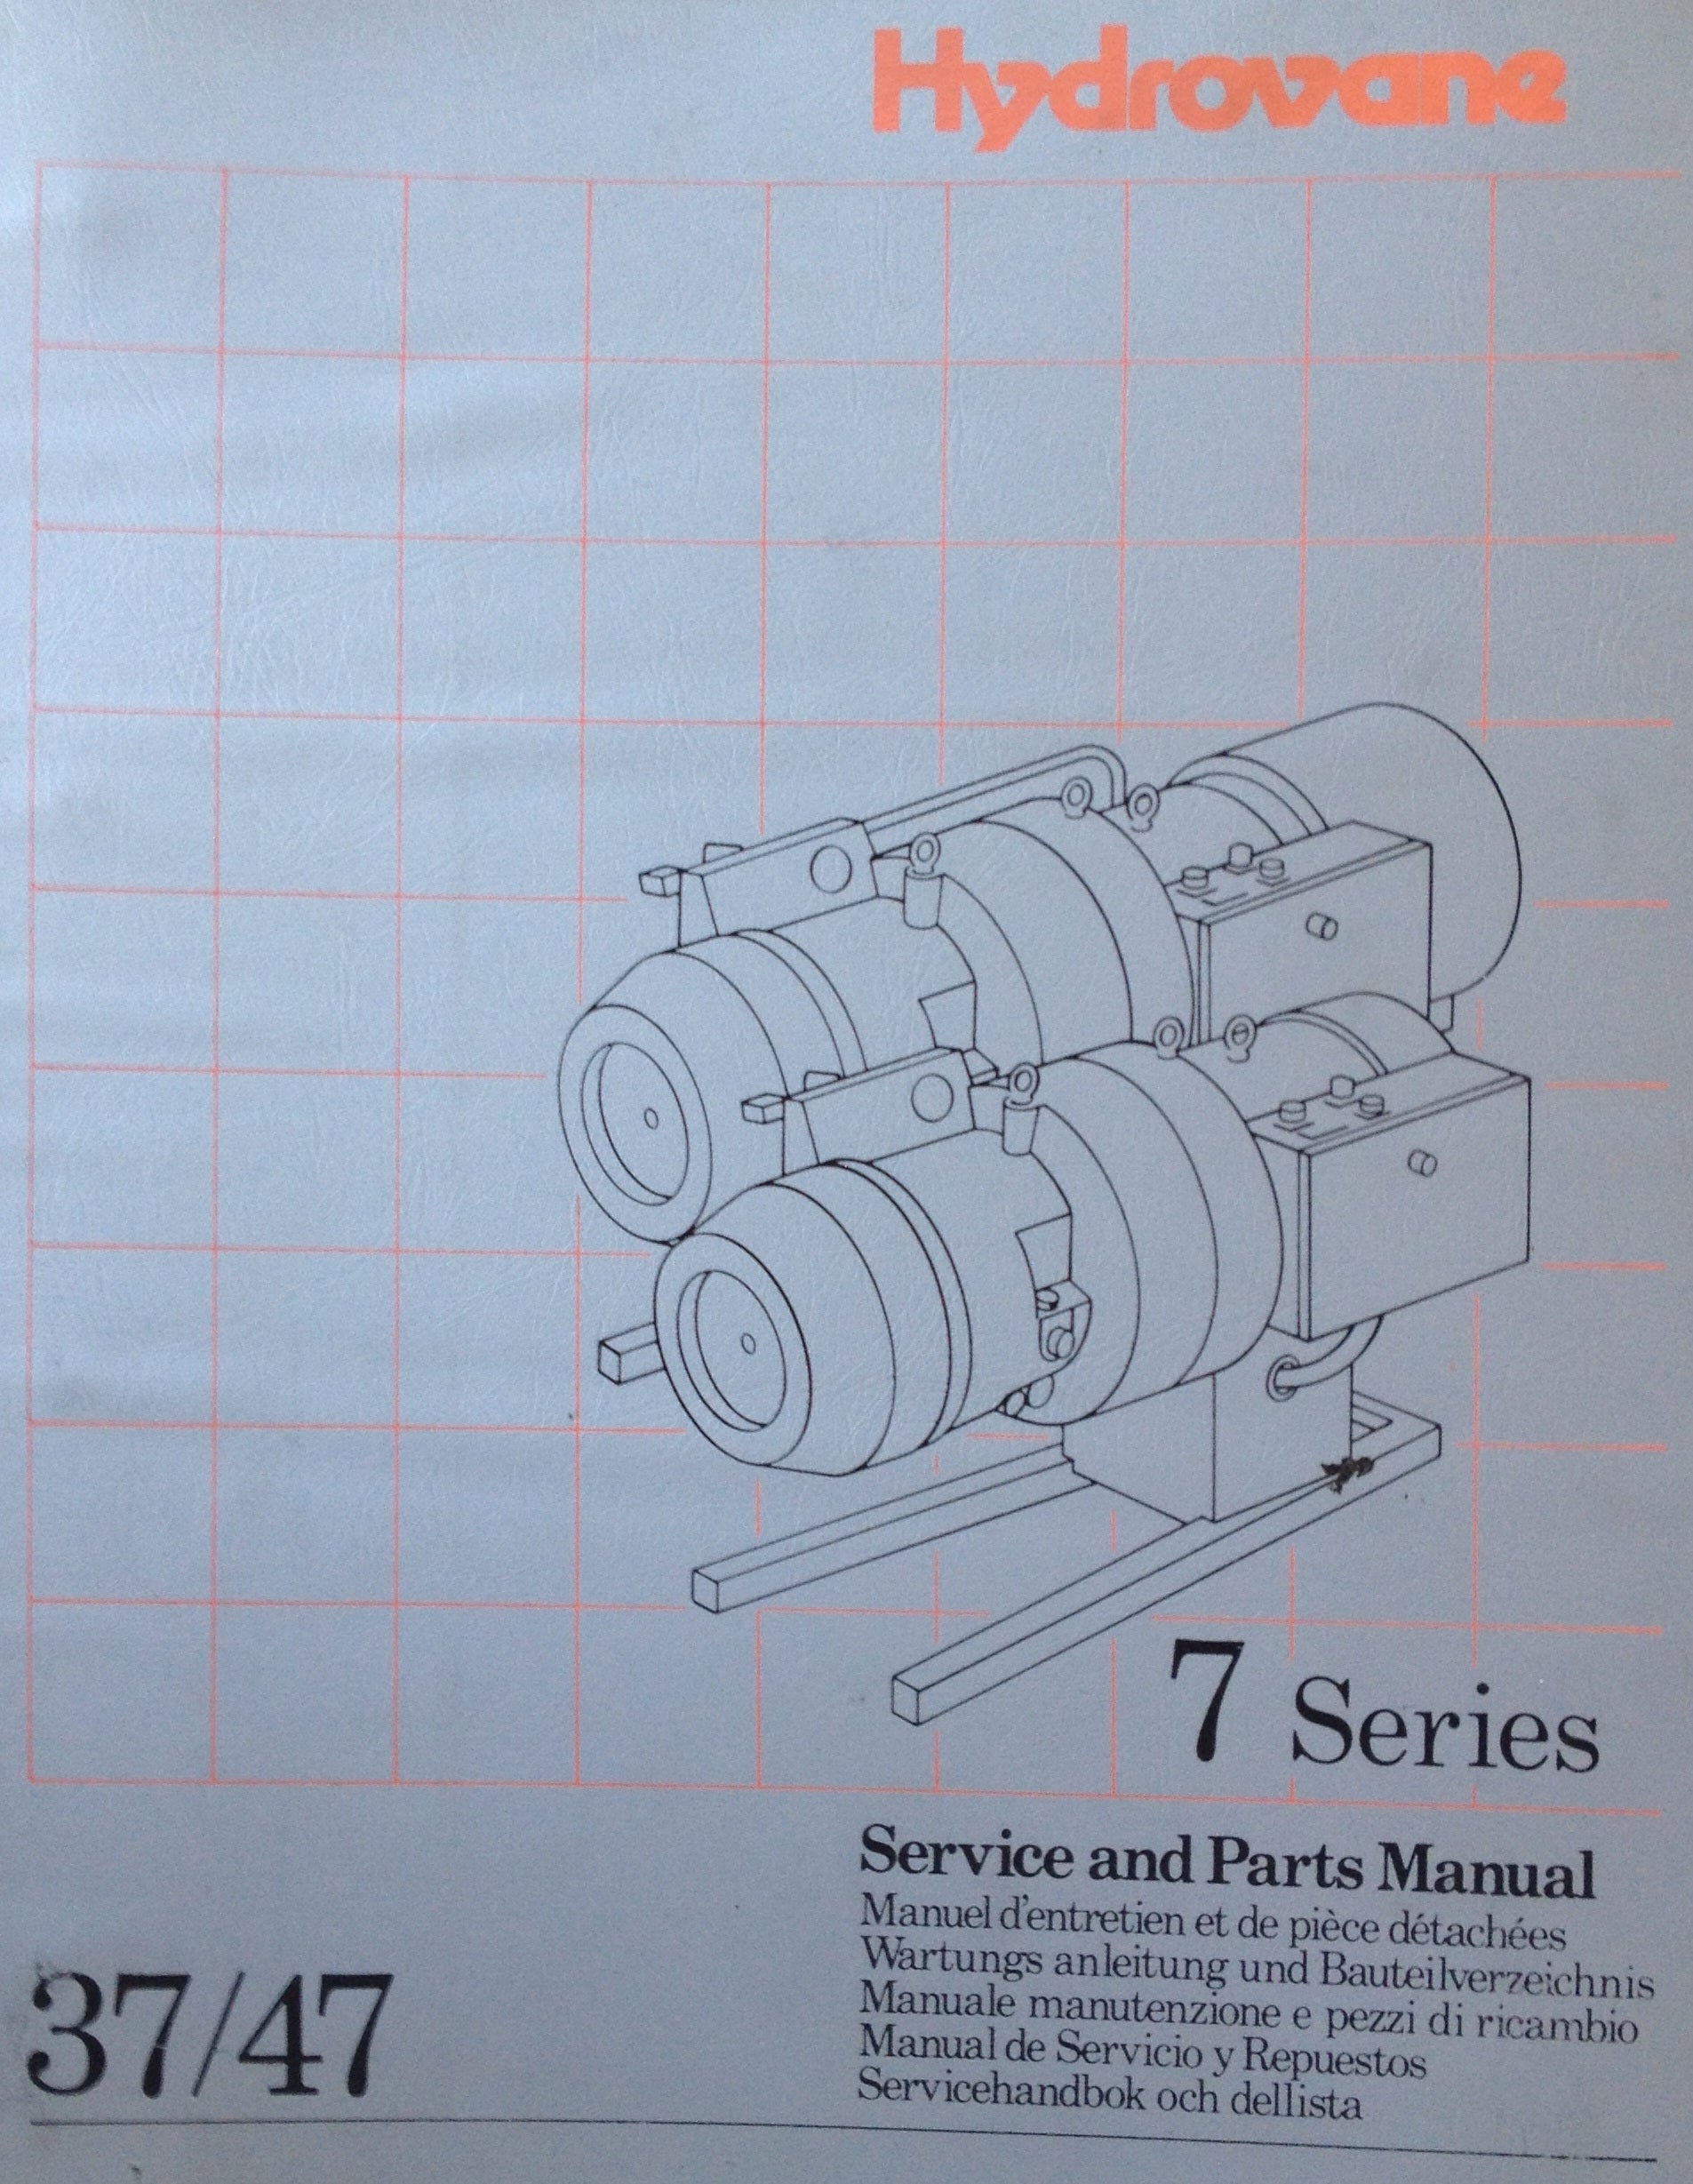 Hydrovane 7 Series 37 & 47 Service Parts Manual 1989 Onwards Power Tool Equipment Manuals